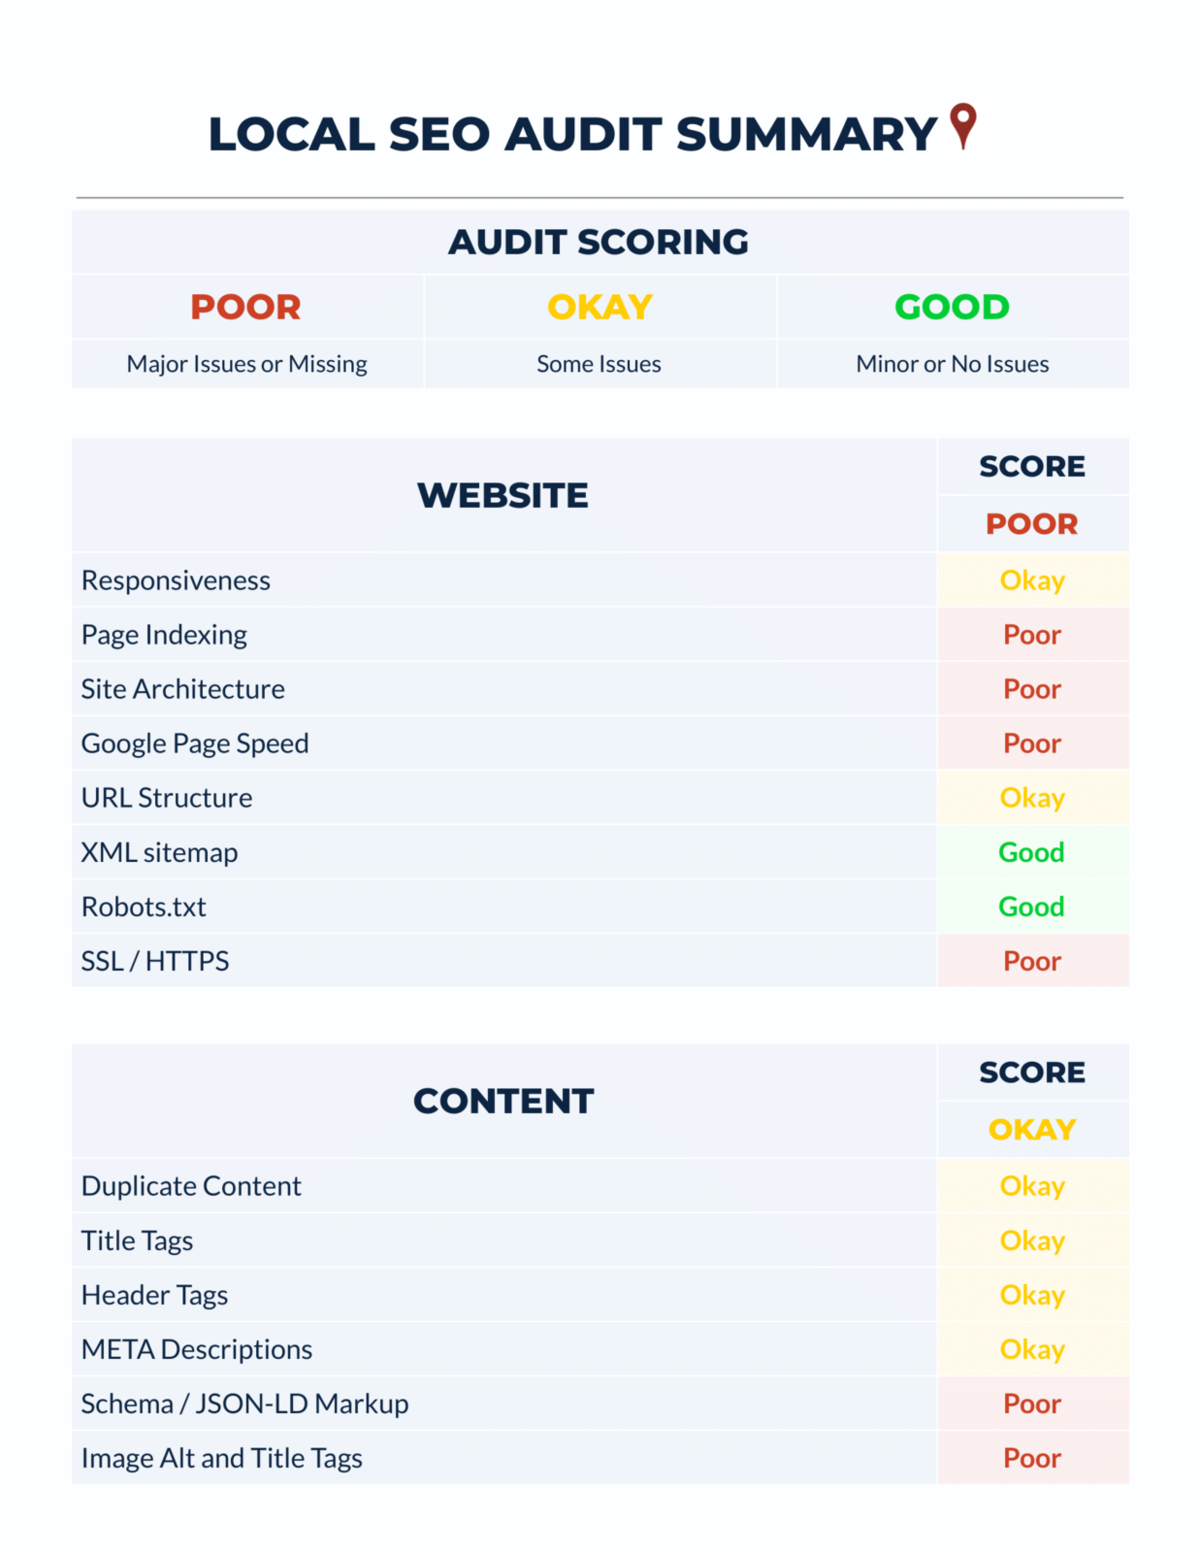 LOCAL-SEO-AUDIT-SUMMARY.png